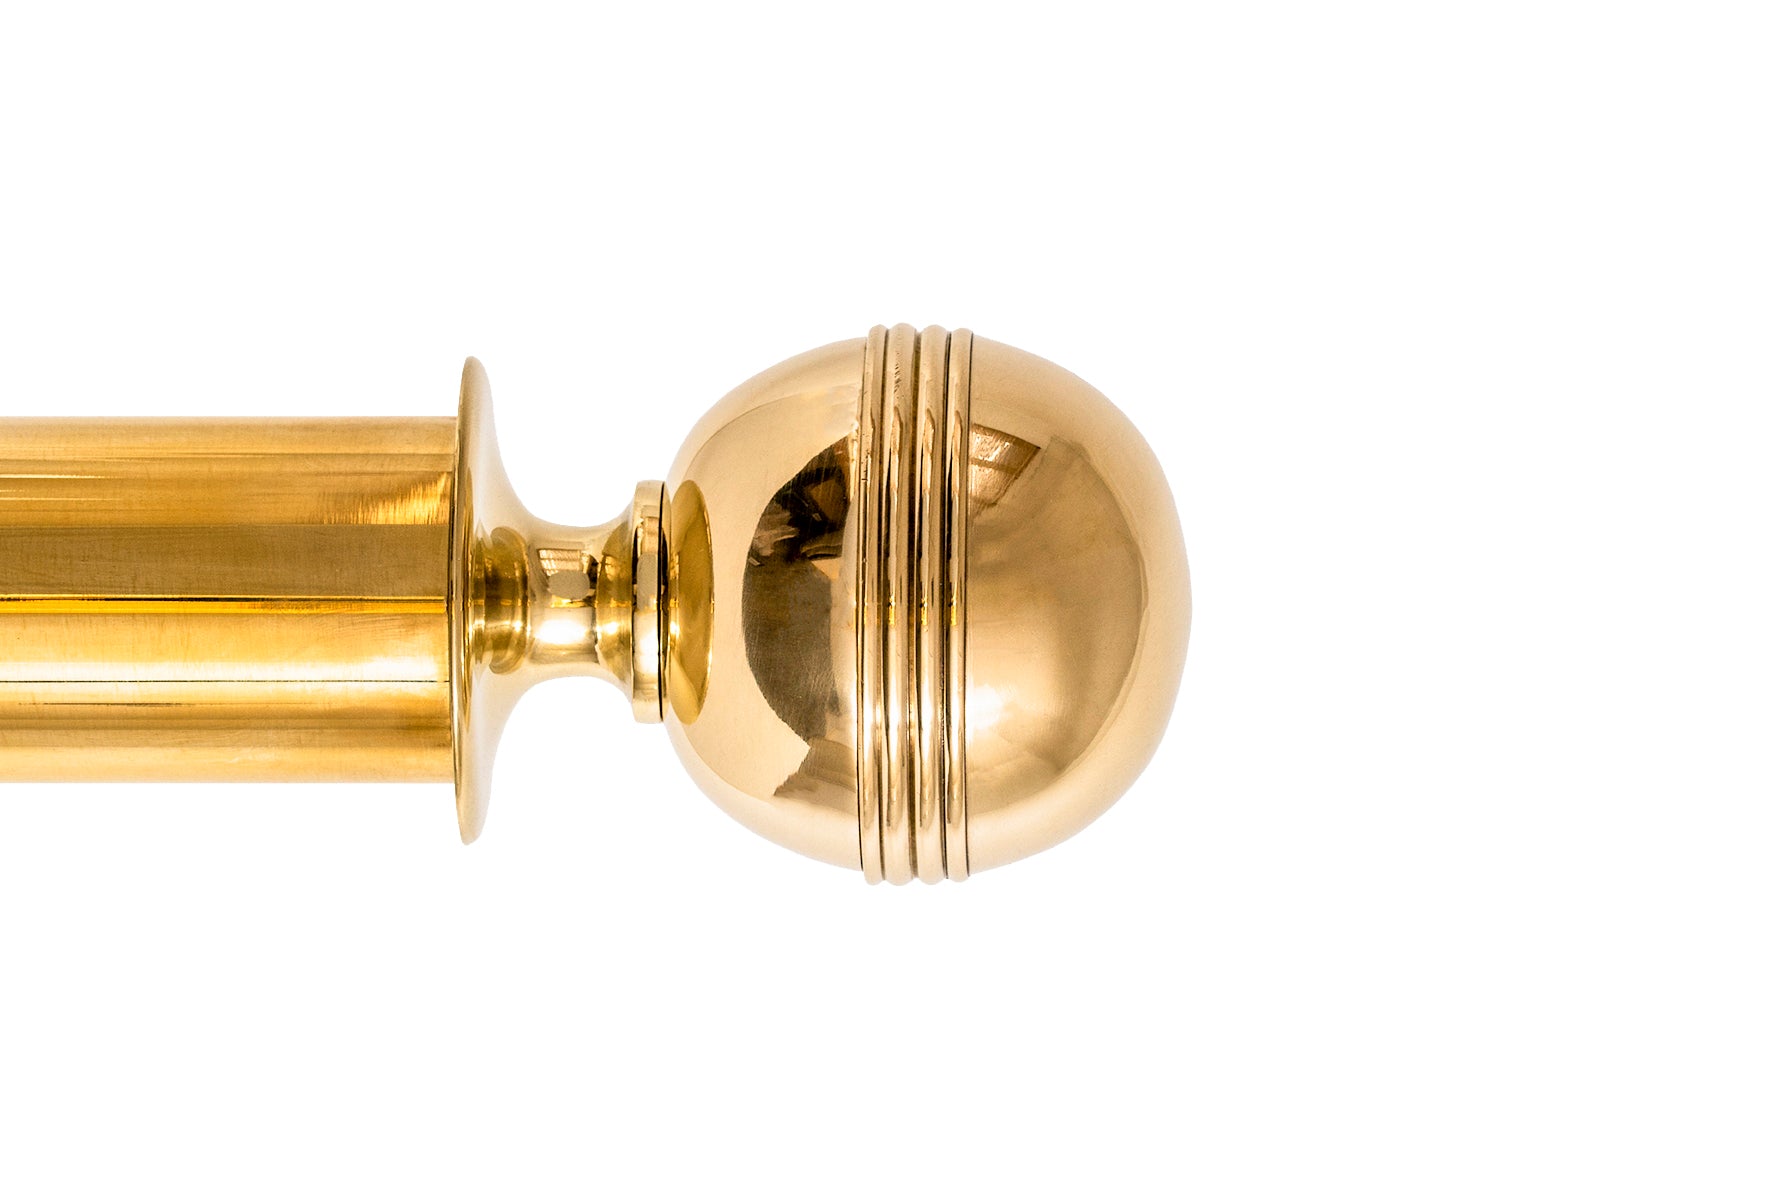 Tillys Classic Four Rib Ball Finial Curtain Pole Set in Polished Brass